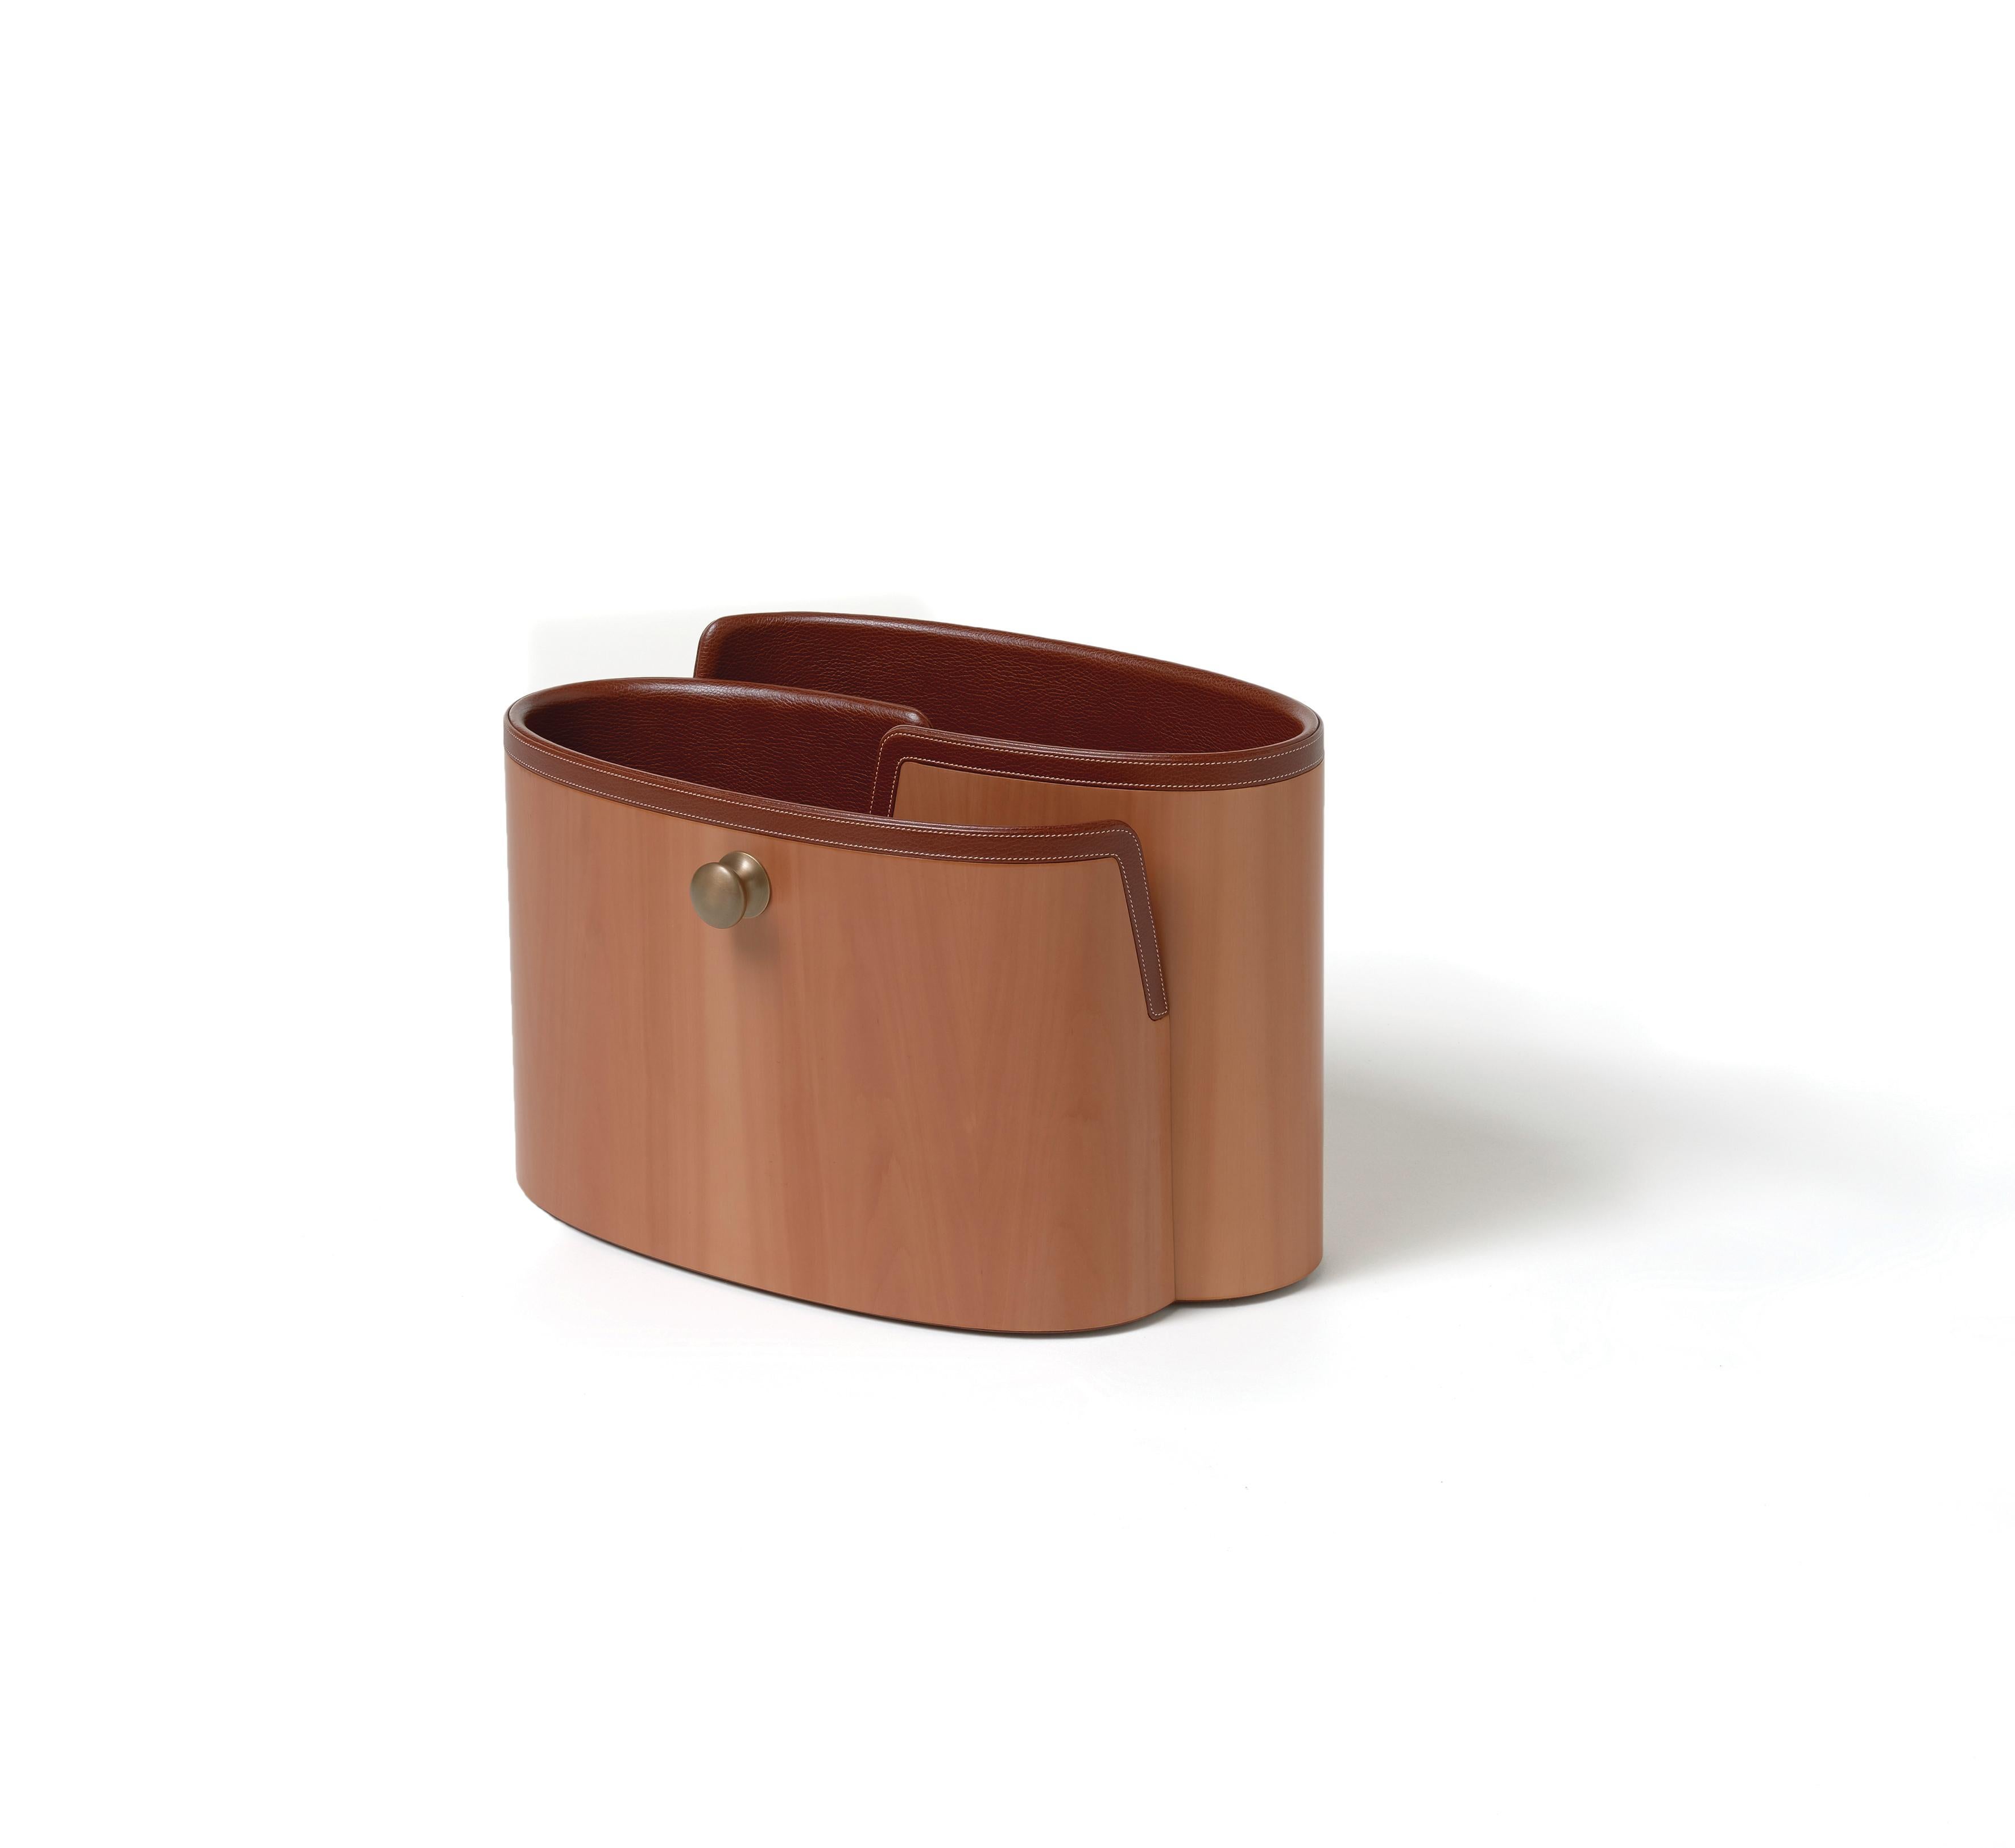 A curved profiles intertwine, echoing natural forms, in this versatile magazine container with delicate lines. The available finishings present different combinations of wood, smooth and tumbled leather, bringing out the best in each of these